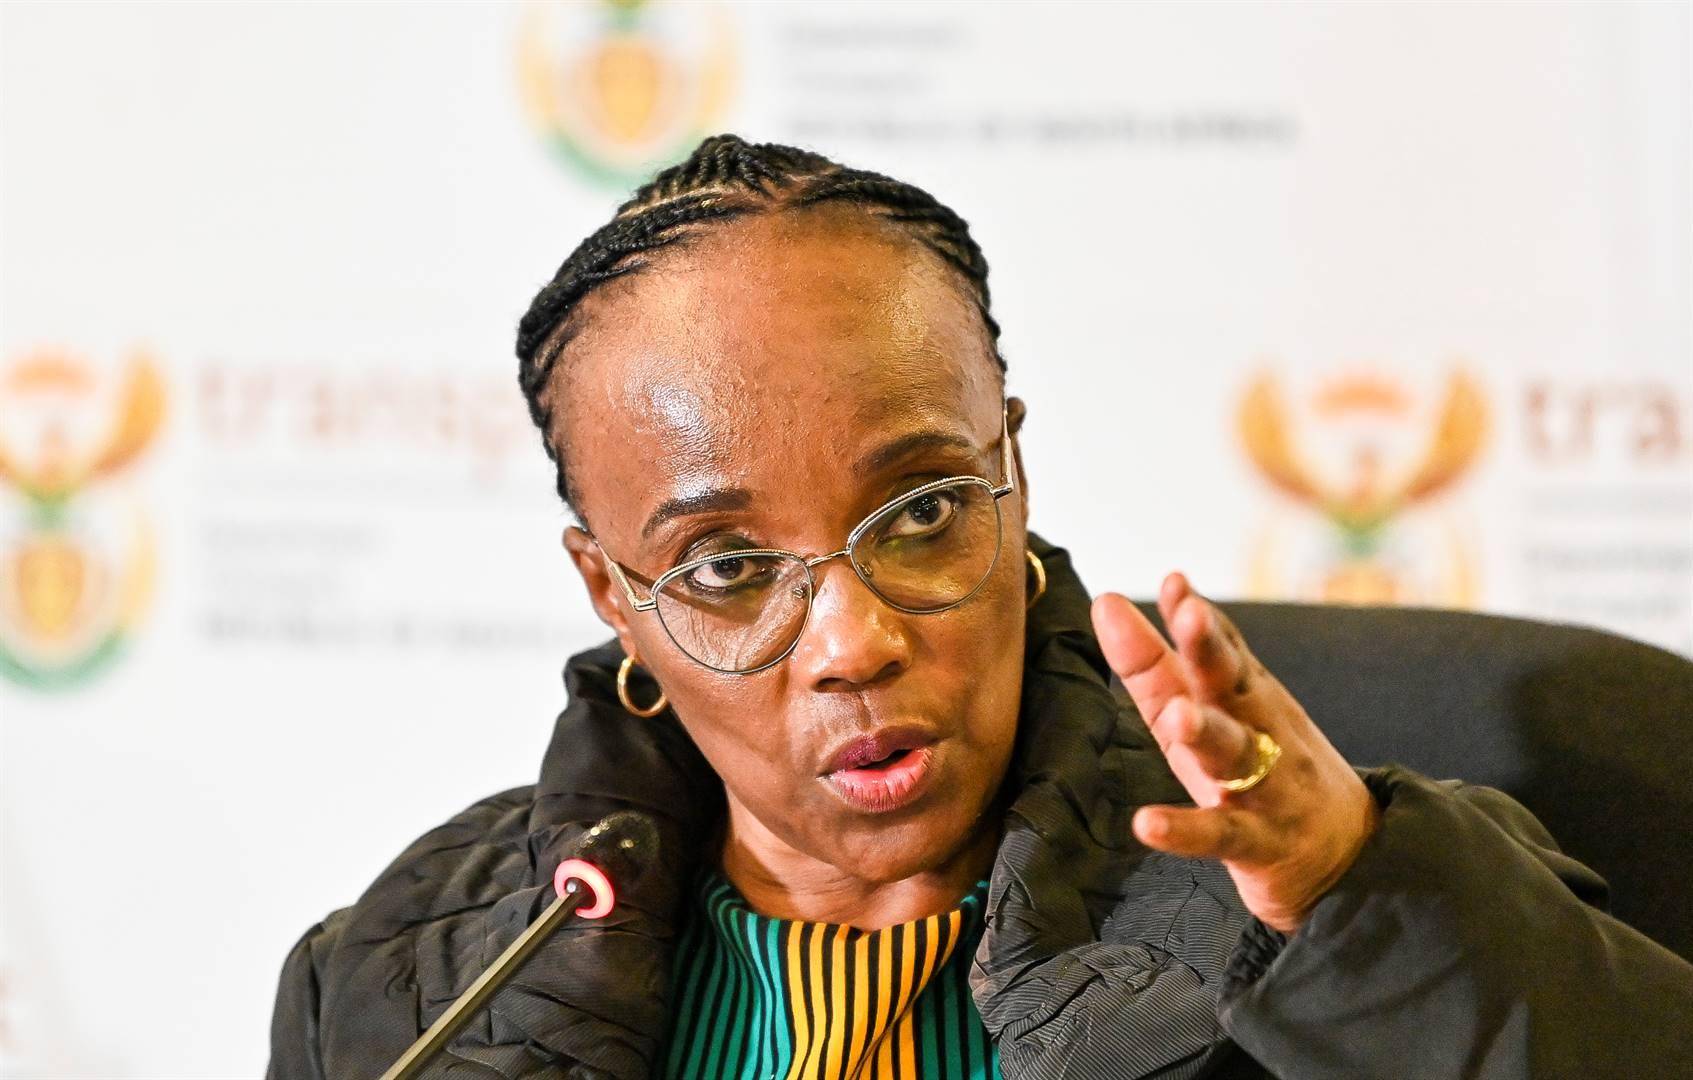 Sindisiwe Chikunga, minister of transport, conveyed her deepest condolences to the families and loved ones of the deceased